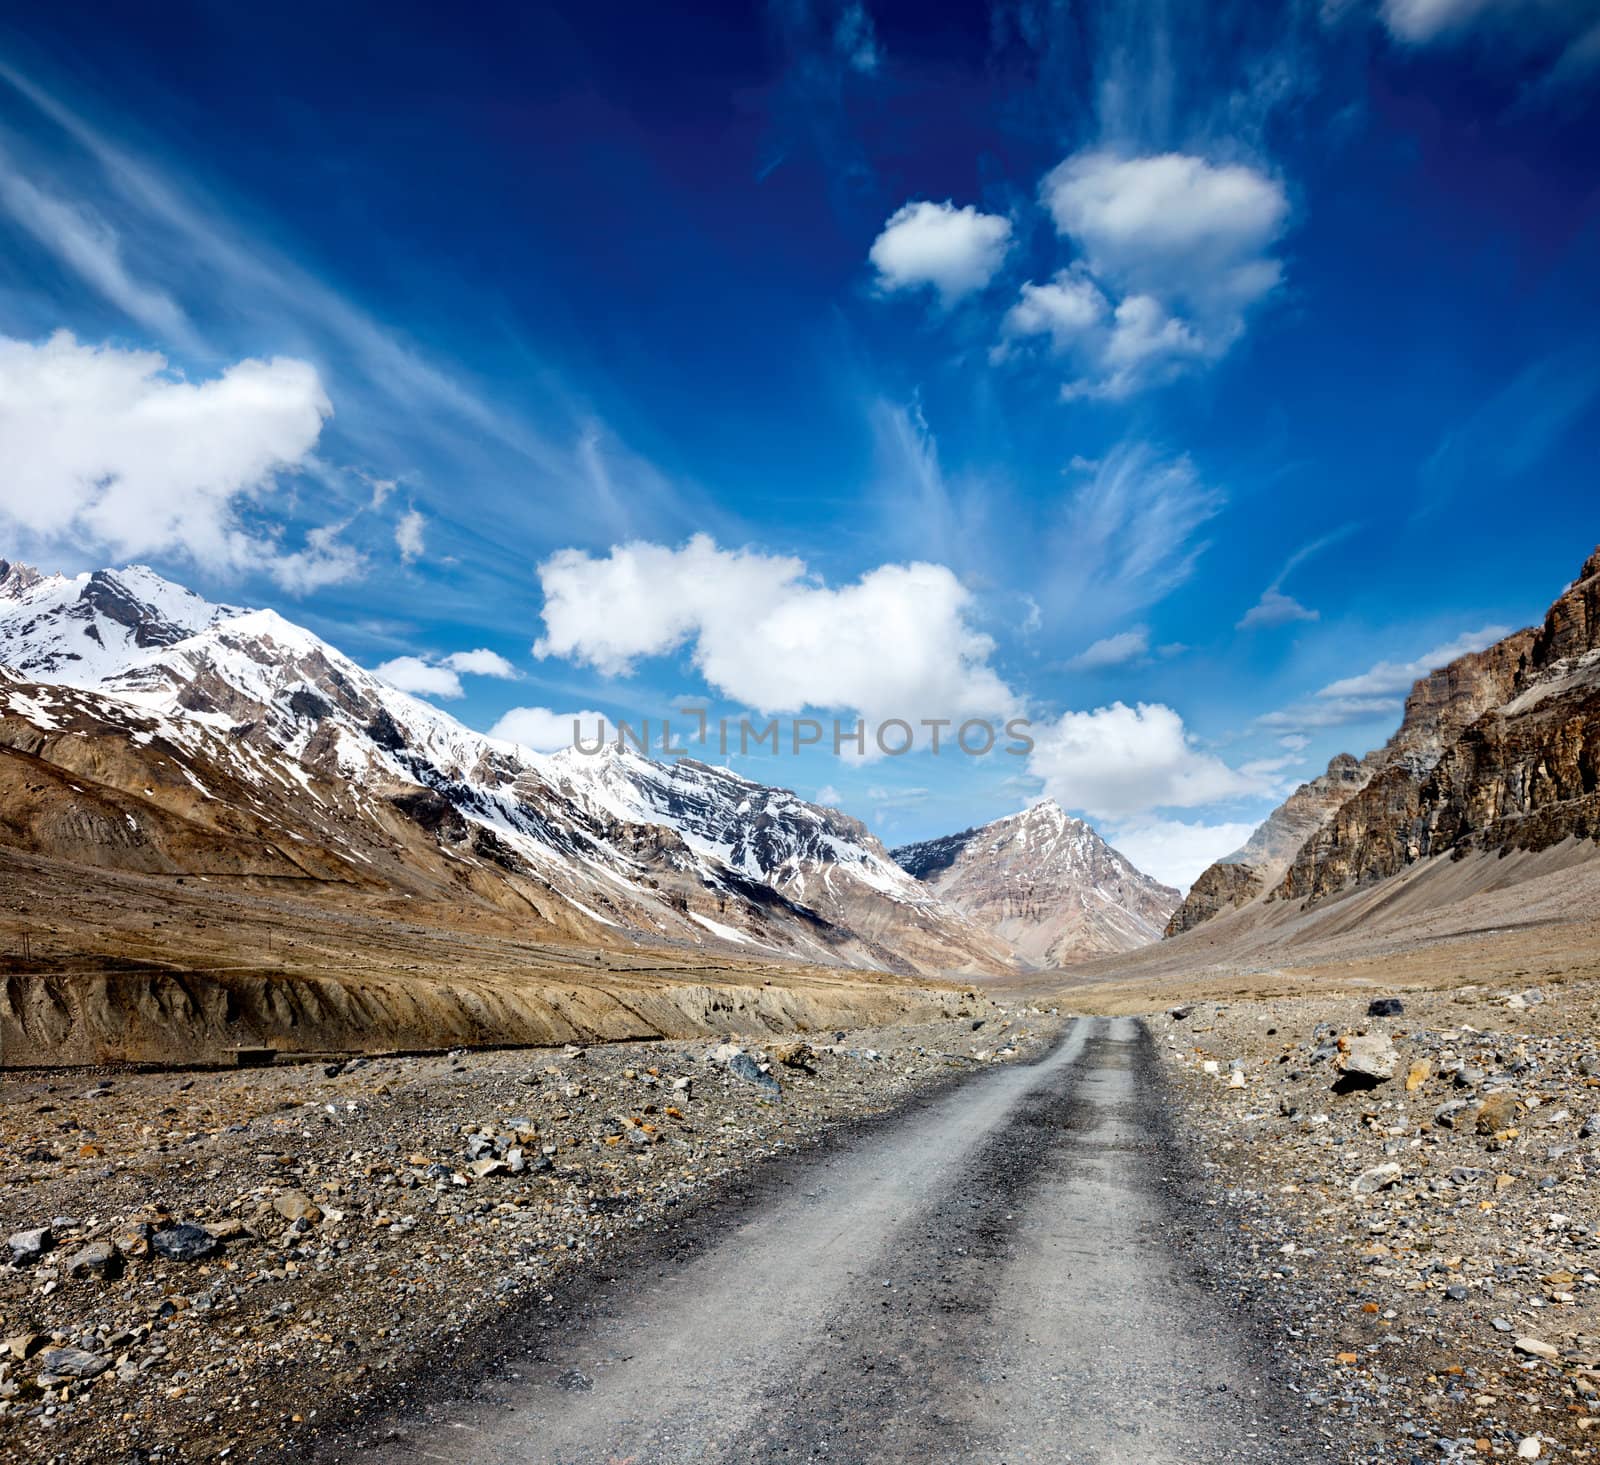 Road in Himalayas by dimol